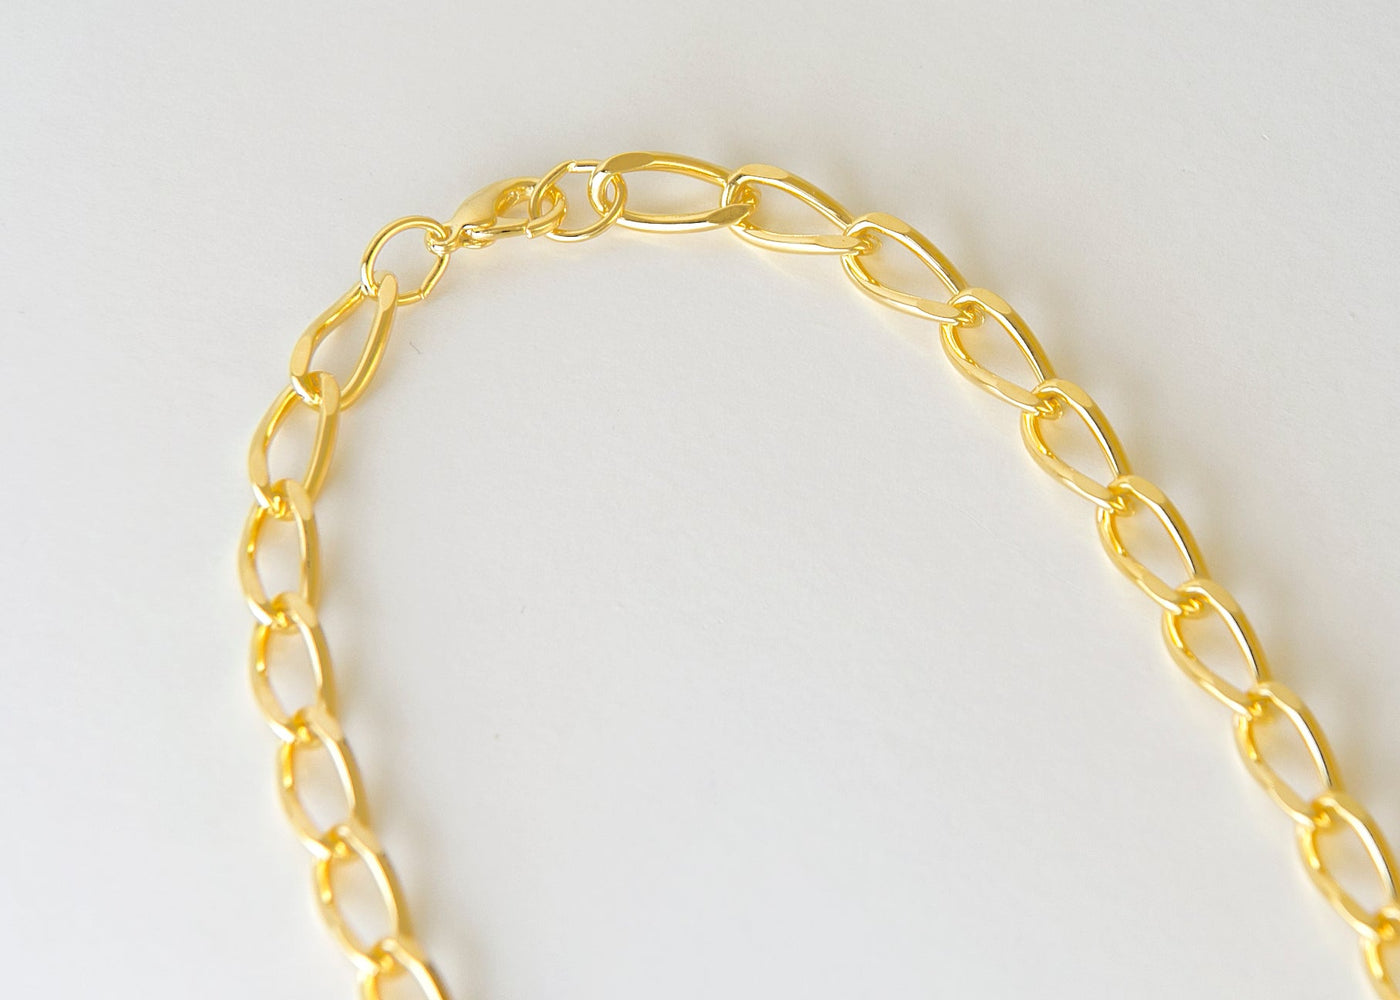 Fine Gold Plated Curb Chain Necklace - Maids to Measure